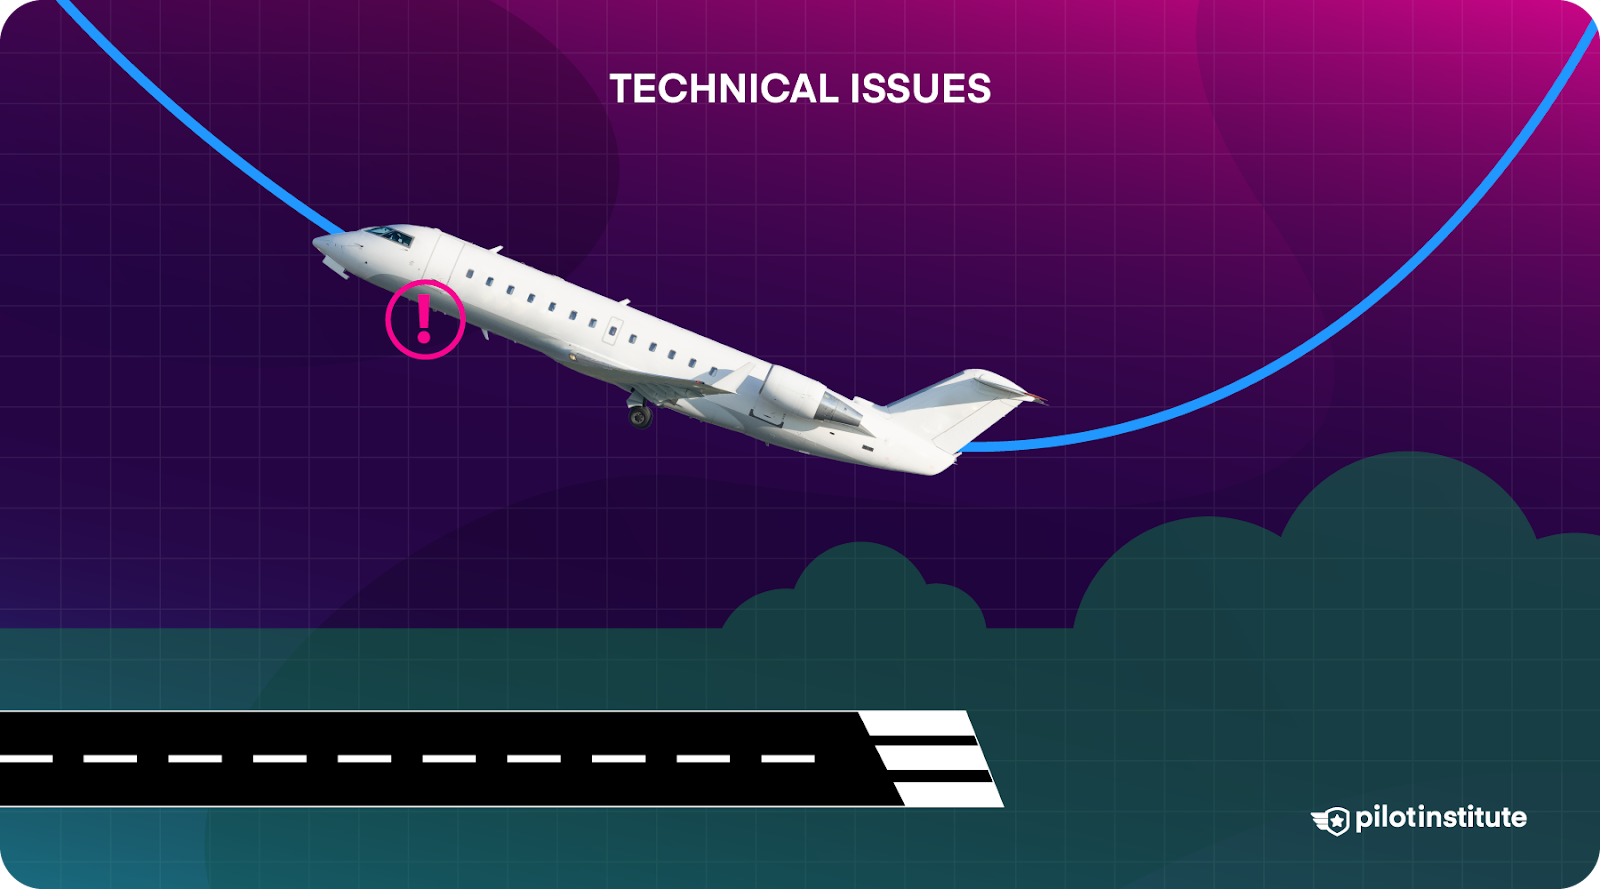 A regional jet performs a go-around due to a nose gear extension issue.